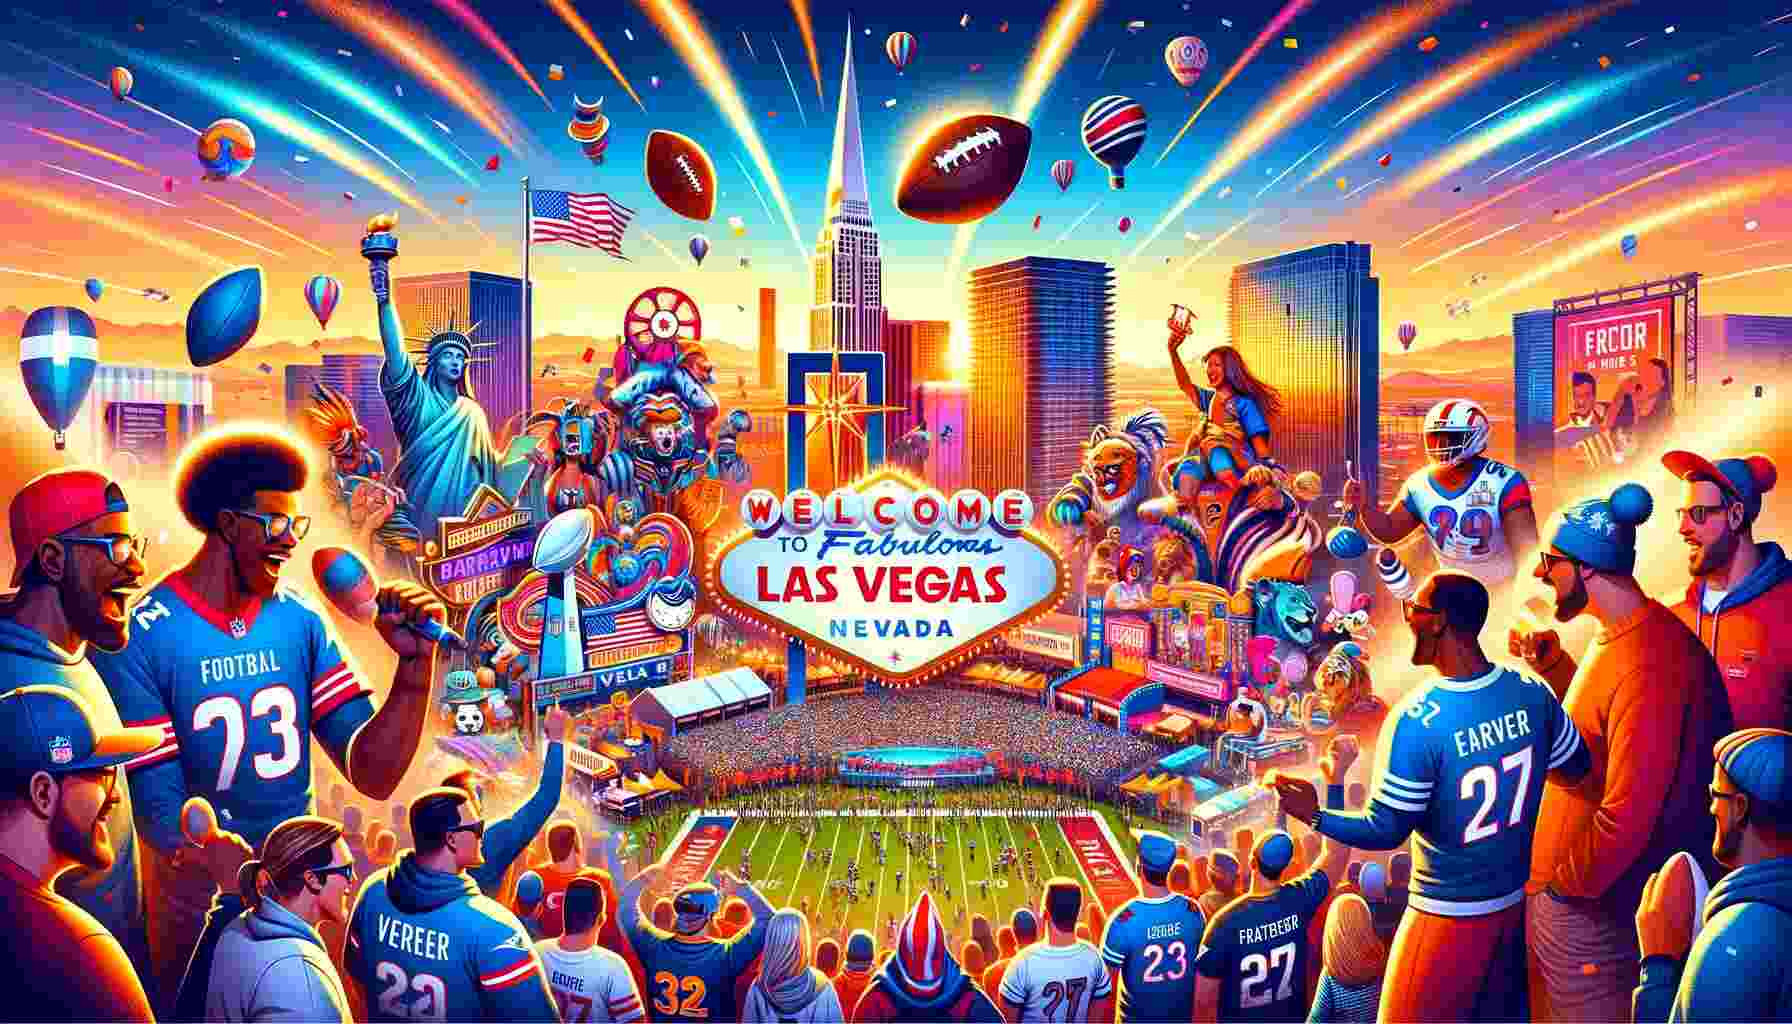 An energetic and colorful image representing the 2024 Super Bowl LVIII in Las Vegas. The backdrop features the iconic Las Vegas skyline, illuminated with bright lights and famous landmarks. In the foreground, a festive atmosphere prevails with diverse groups of football fans in various team jerseys, engaging in fan activities and celebrations. Elements like a football, sports paraphernalia, and banners signifying Super Bowl LVIII add to the celebratory mood, symbolizing the excitement and grandeur of the event.